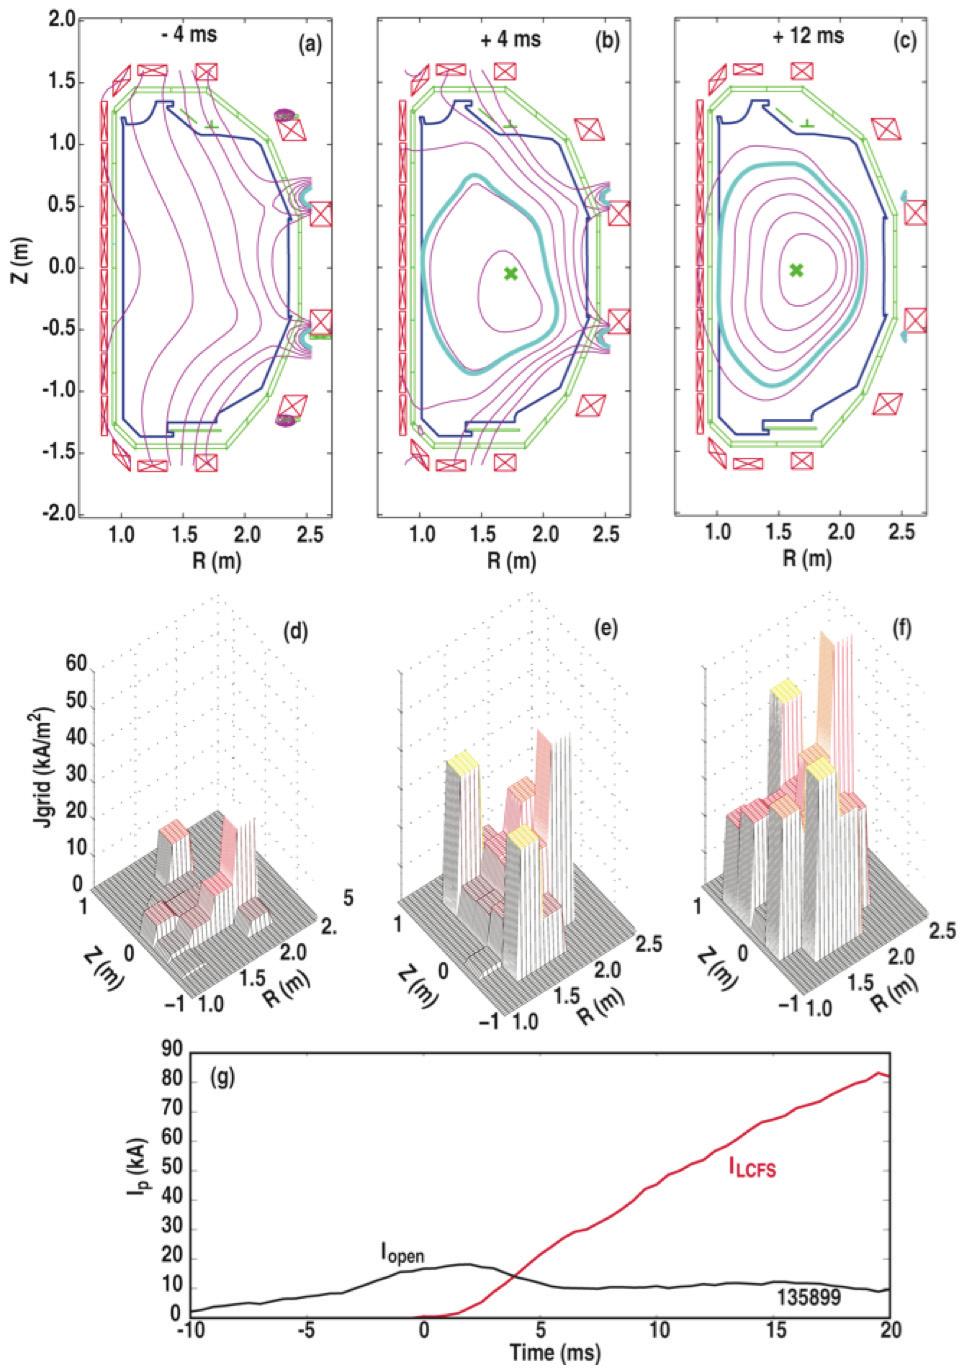 G.L. Jackson, et al. DIII-D EXPERIMENTAL SIMULATION OF ITER SCENARIO ACCESS AND TERMINATION t = -4 ms all plasma current is still on open field lines, Fig. 4(a,g).